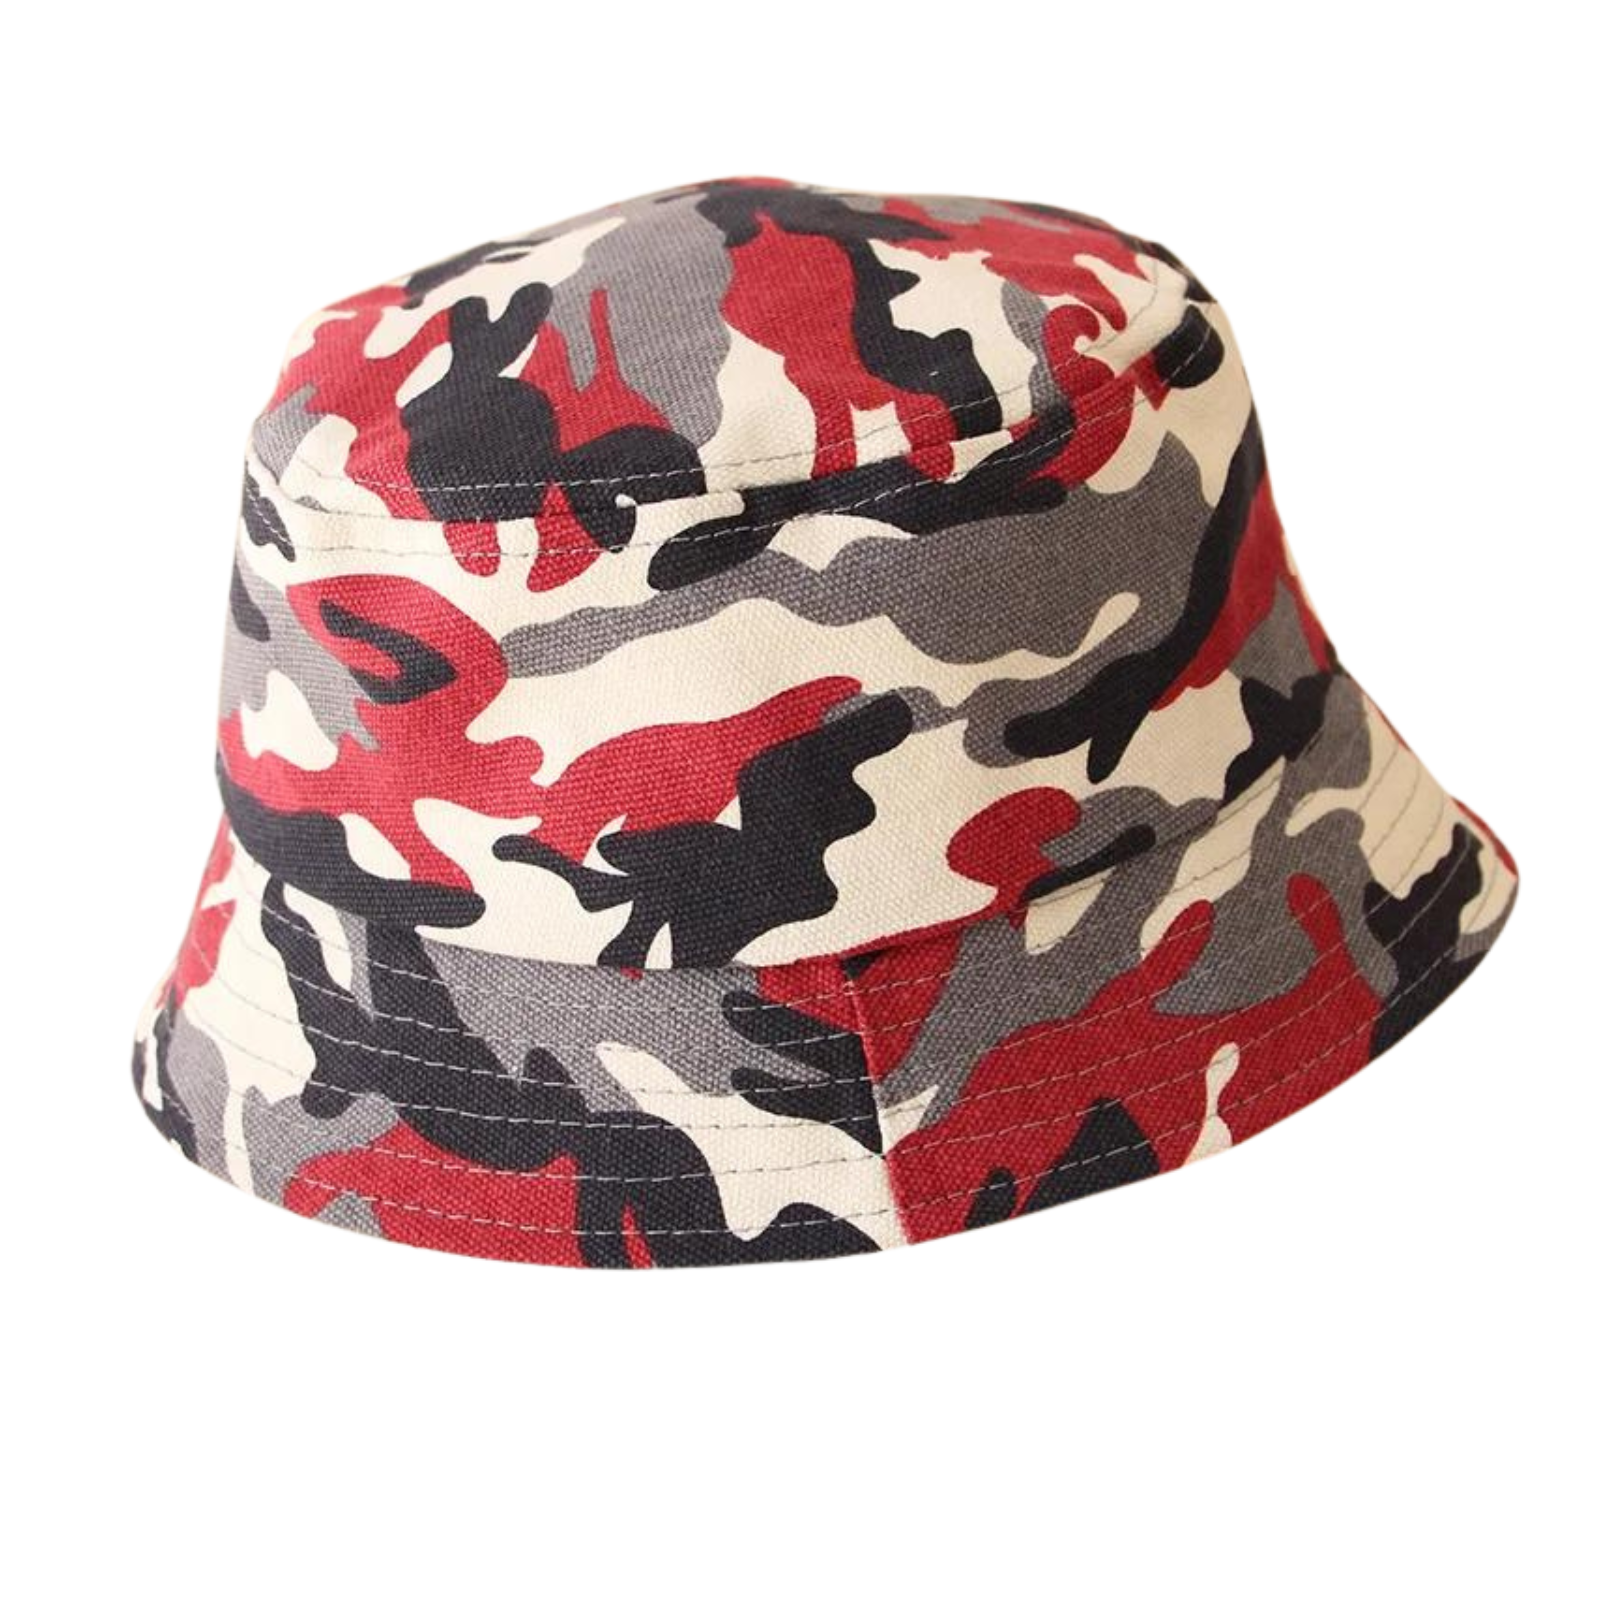 Camouflage Toddler Sun Hat